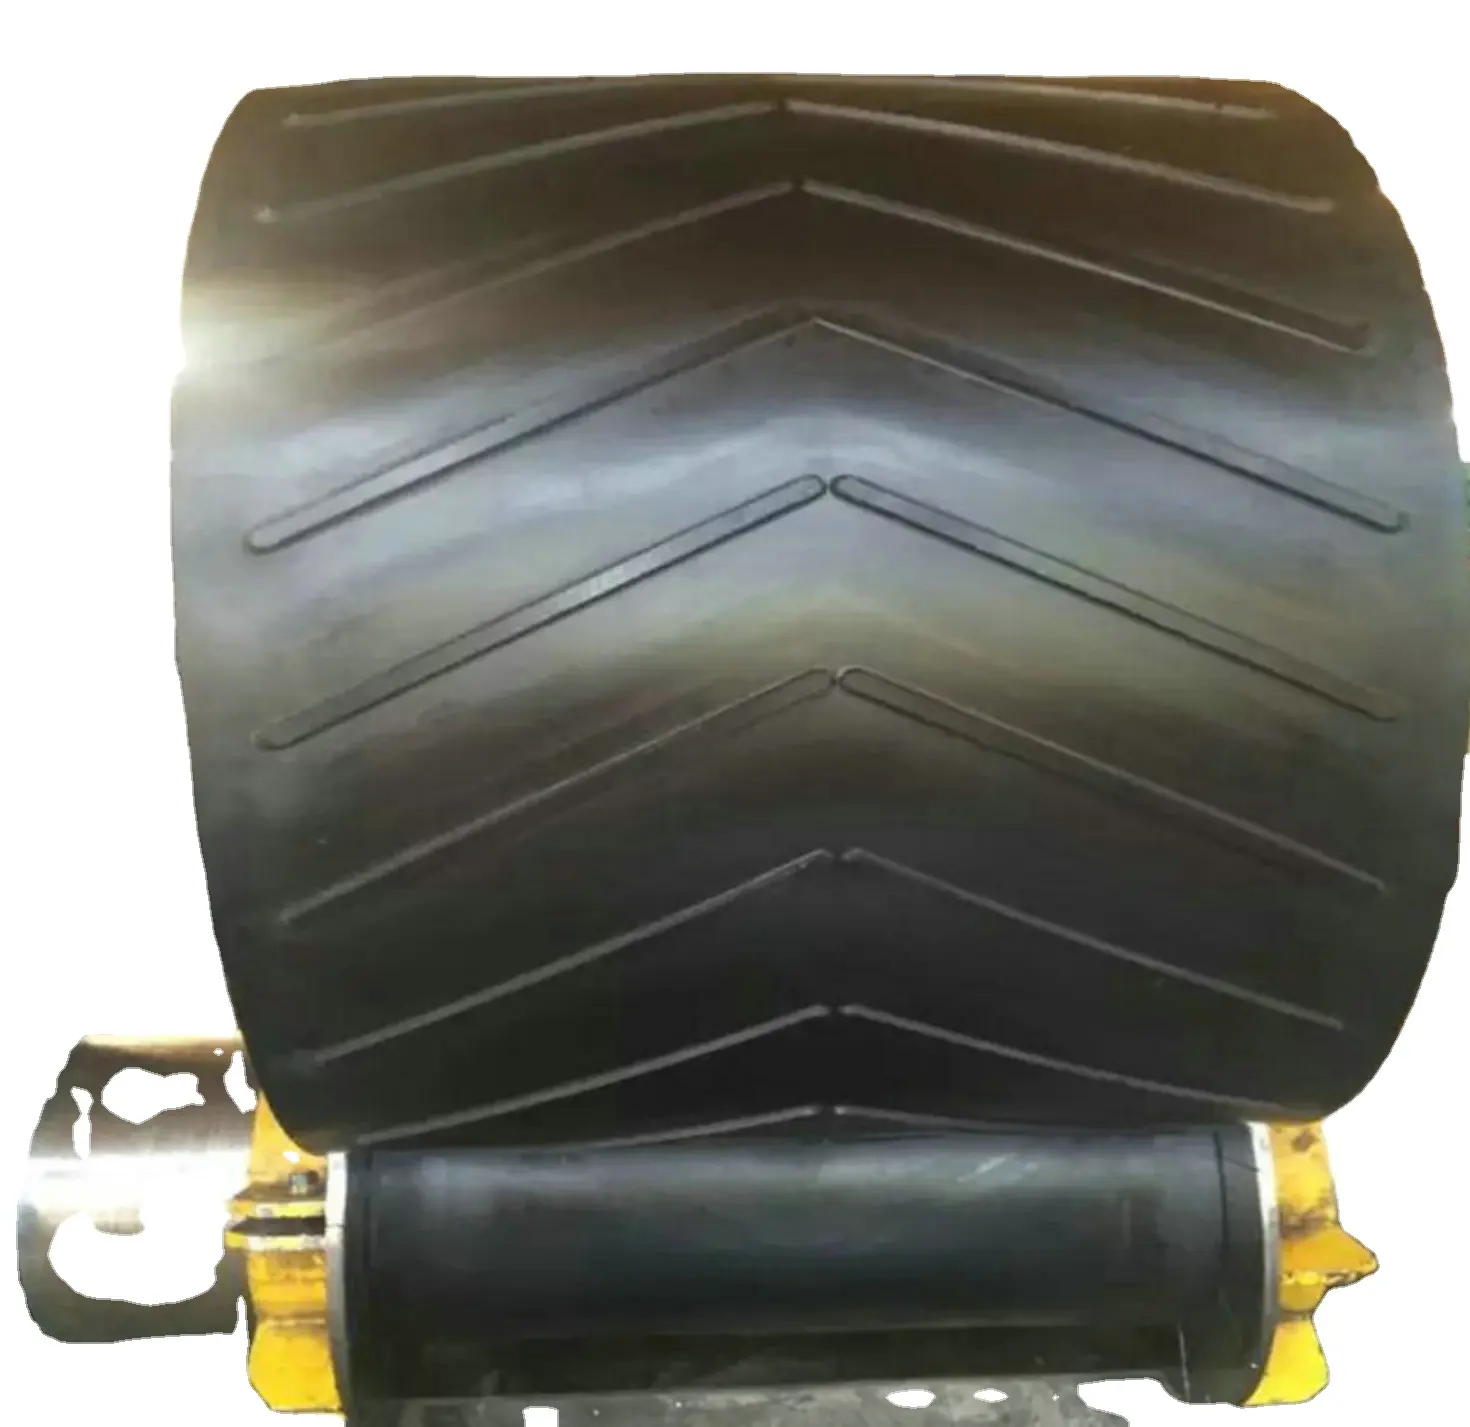 First-class Quality Industrial Rubber Patterned Chevron Conveyor Belt